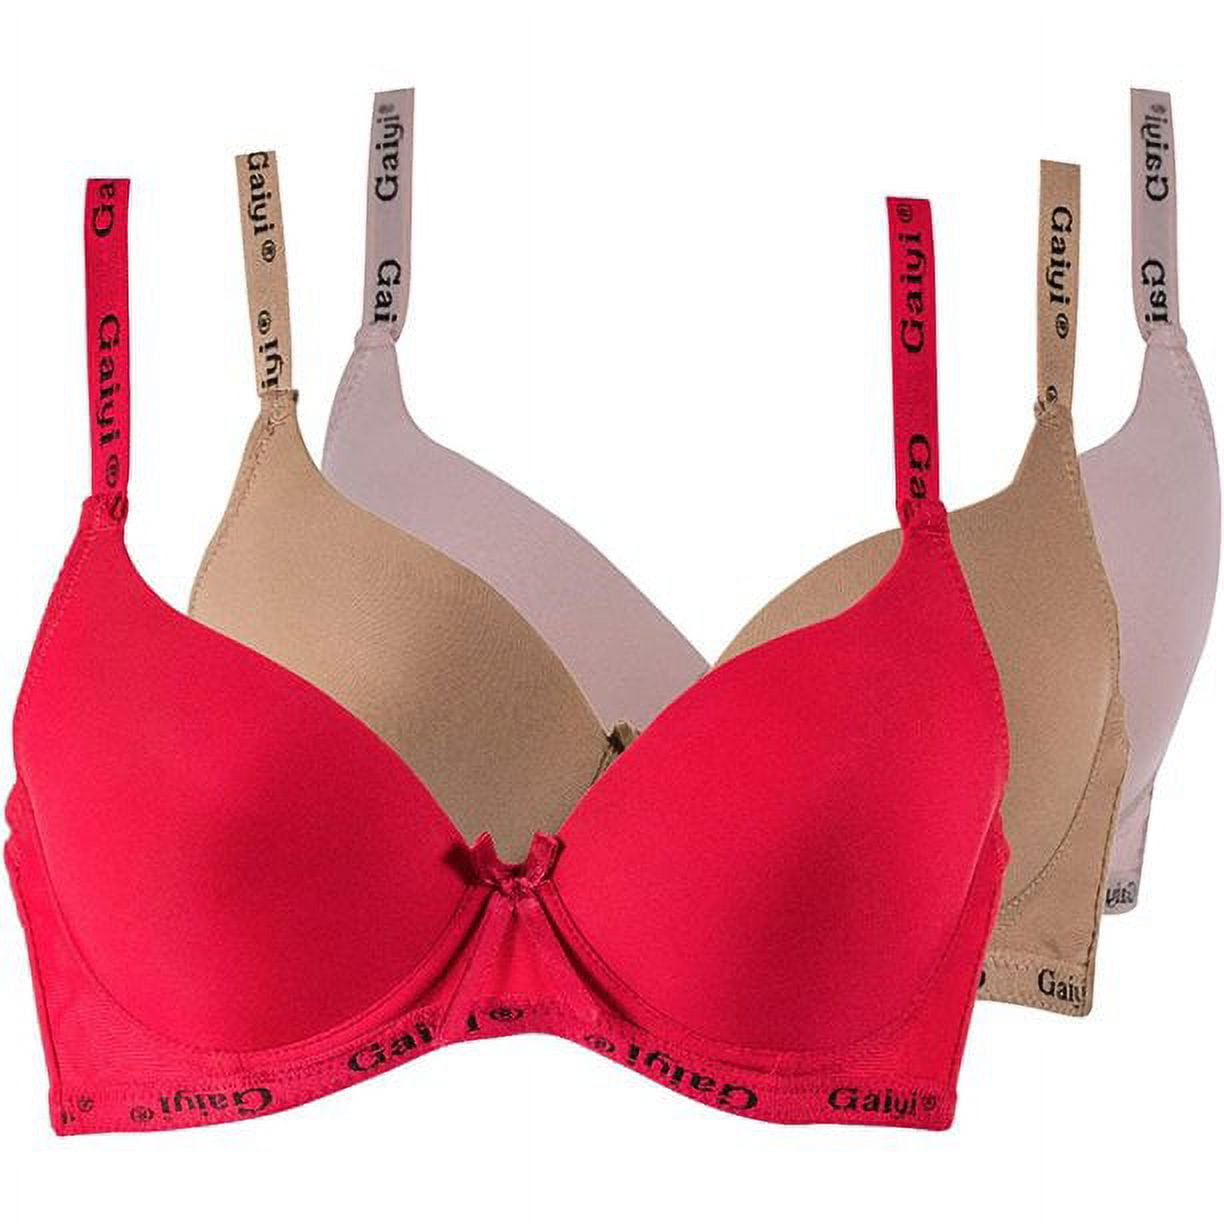 Padded pushup bra pack of 3 at Rs 500/pack